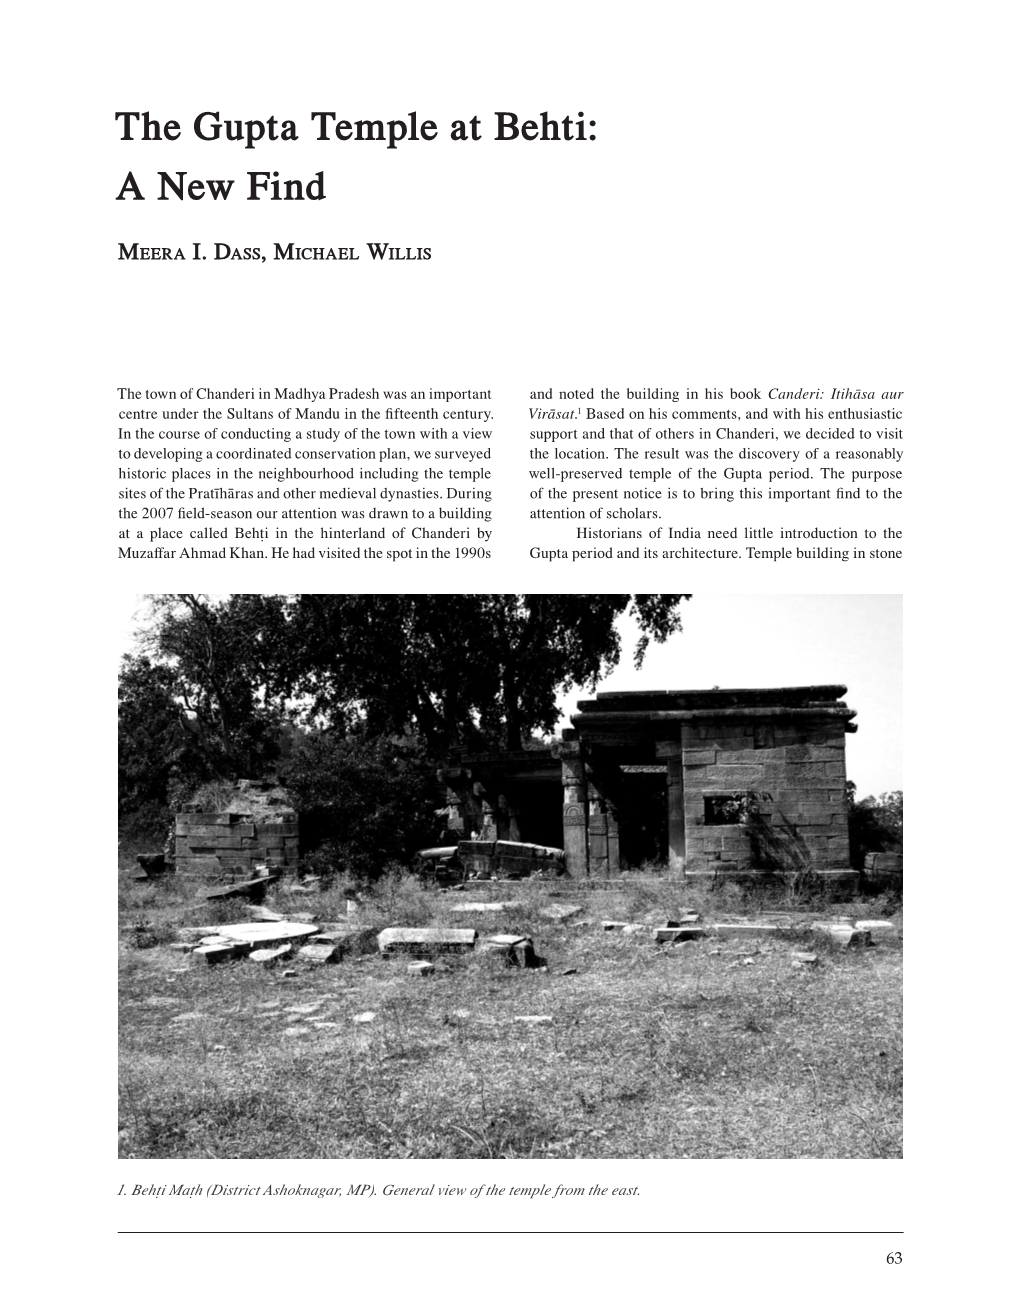 The-Gupta-Temple-At-Behti-A-New-Find-By-Michael-Willis-And-Meera-I-Dass.Pdf